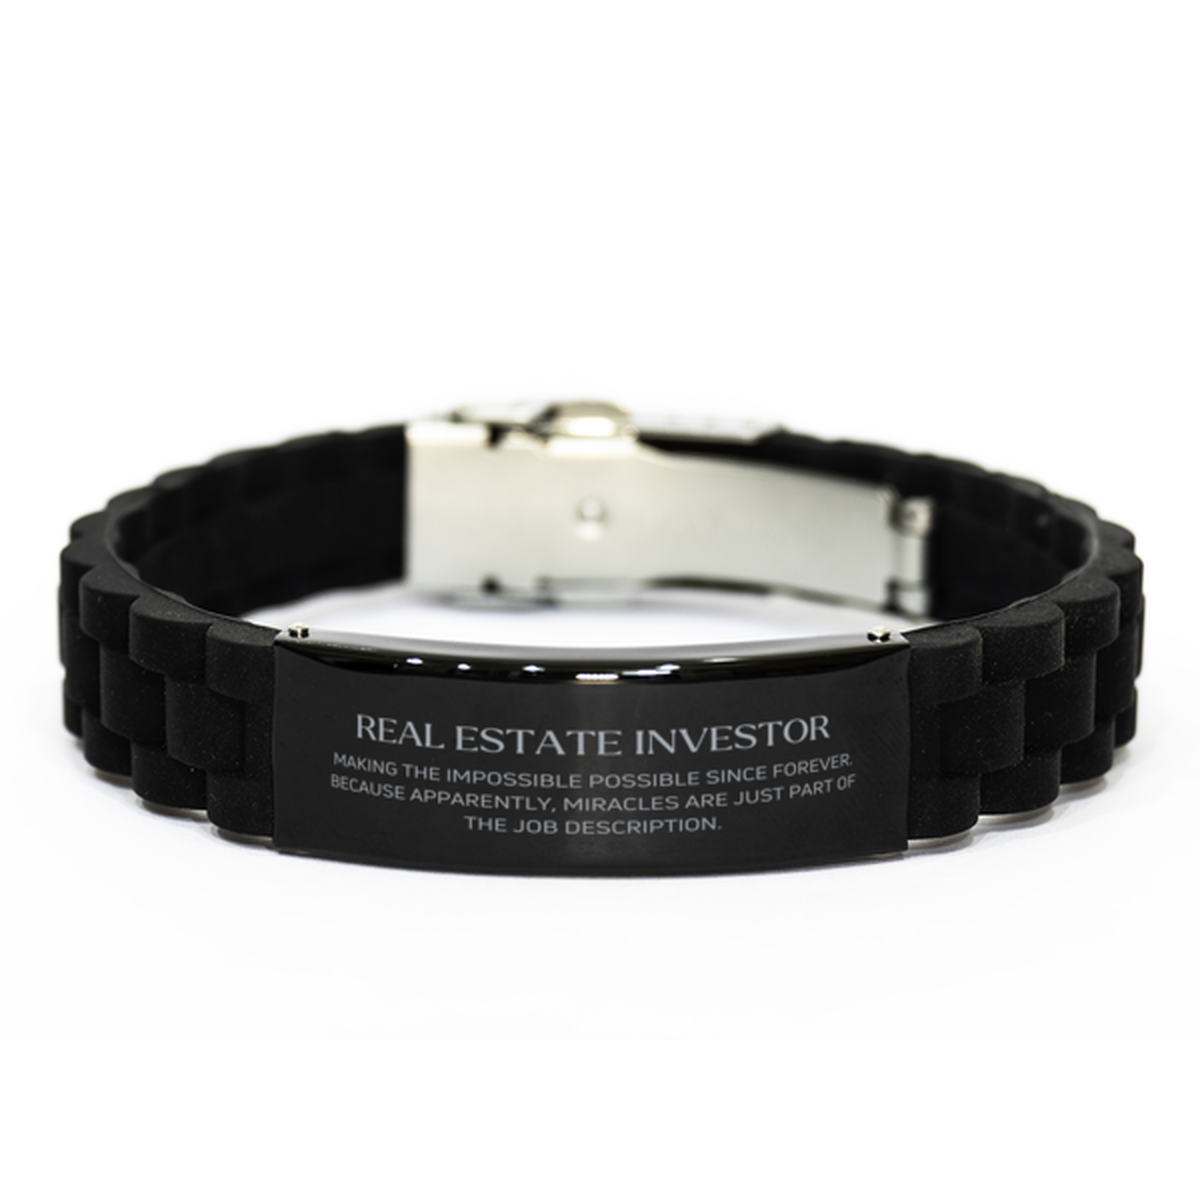 Funny Real Estate Investor Gifts, Miracles are just part of the job description, Inspirational Birthday Black Glidelock Clasp Bracelet For Real Estate Investor, Men, Women, Coworkers, Friends, Boss